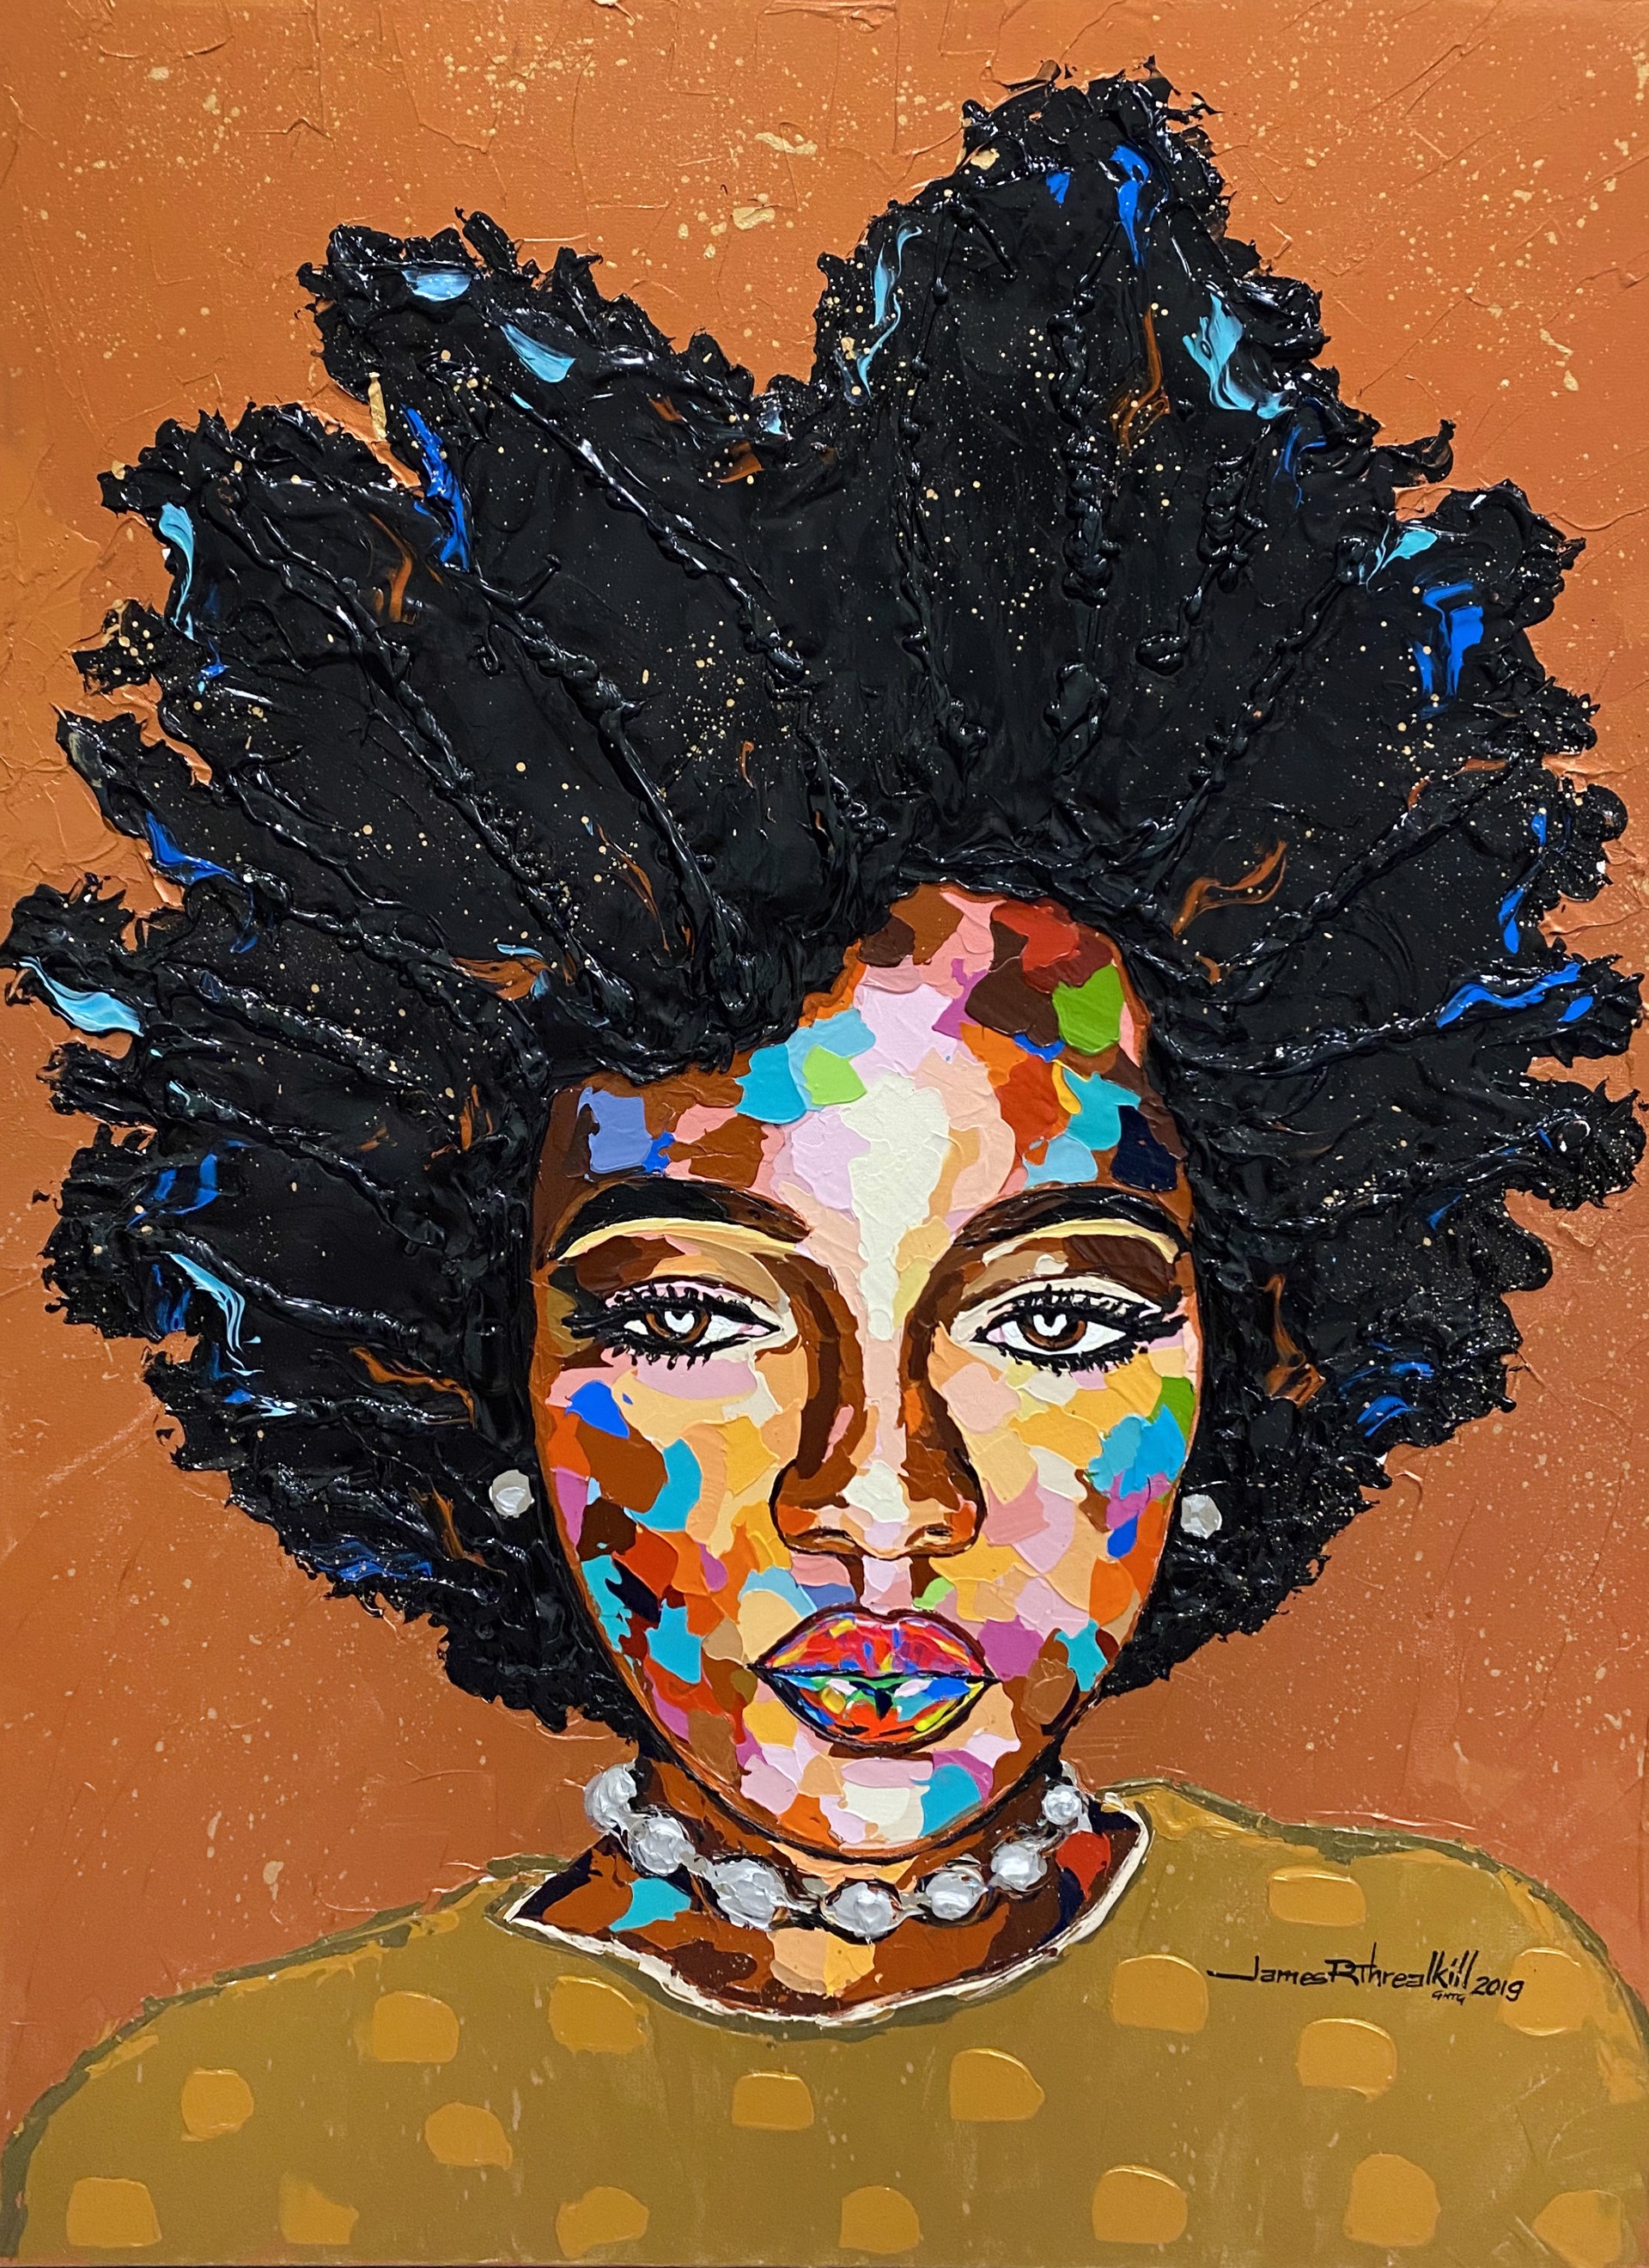 A Colorful Woman by James Threalkill